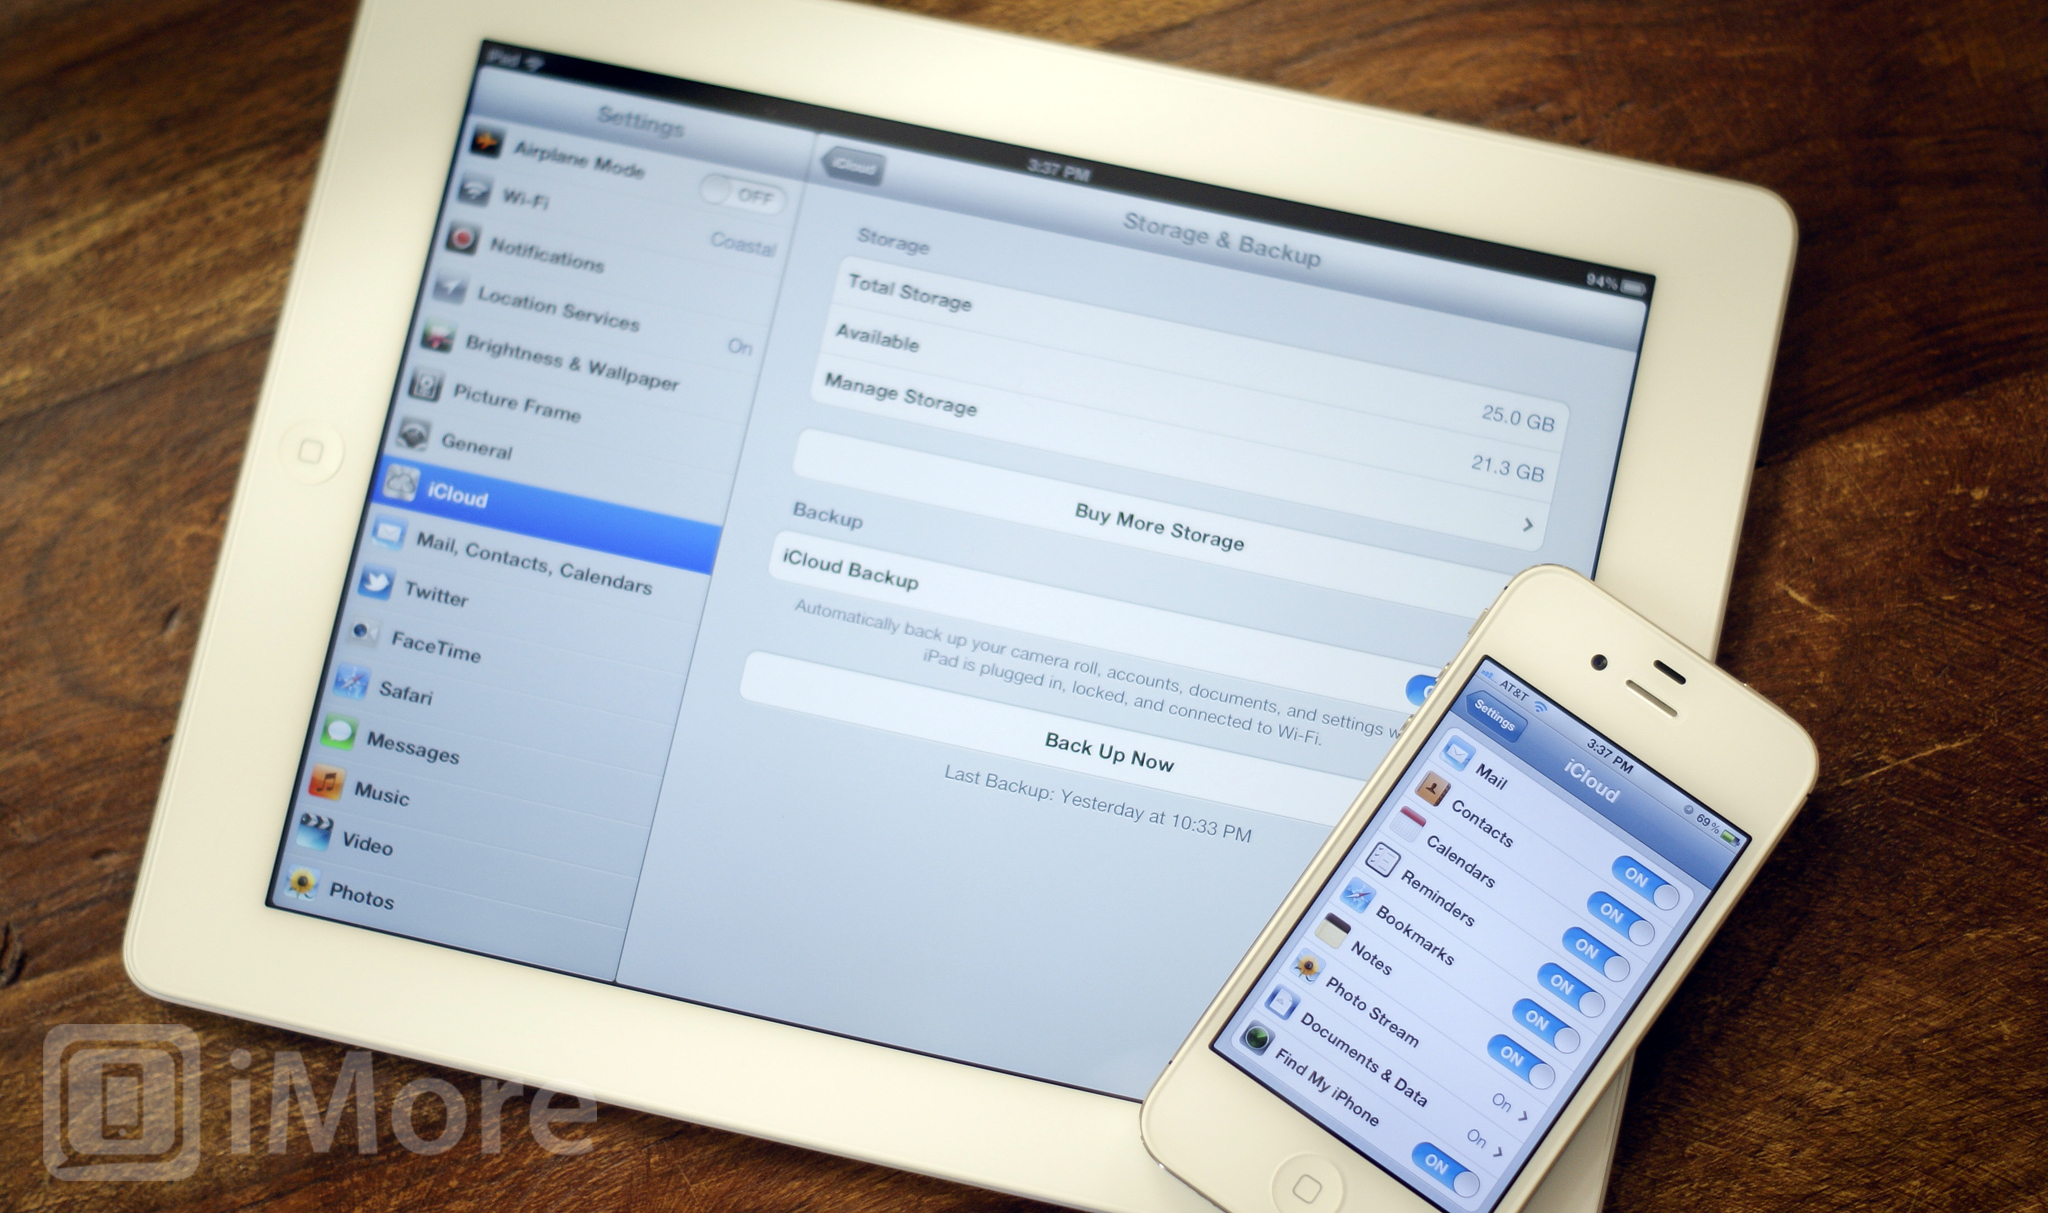 How to set up an iCloud account from your iPhone iPad or iPod